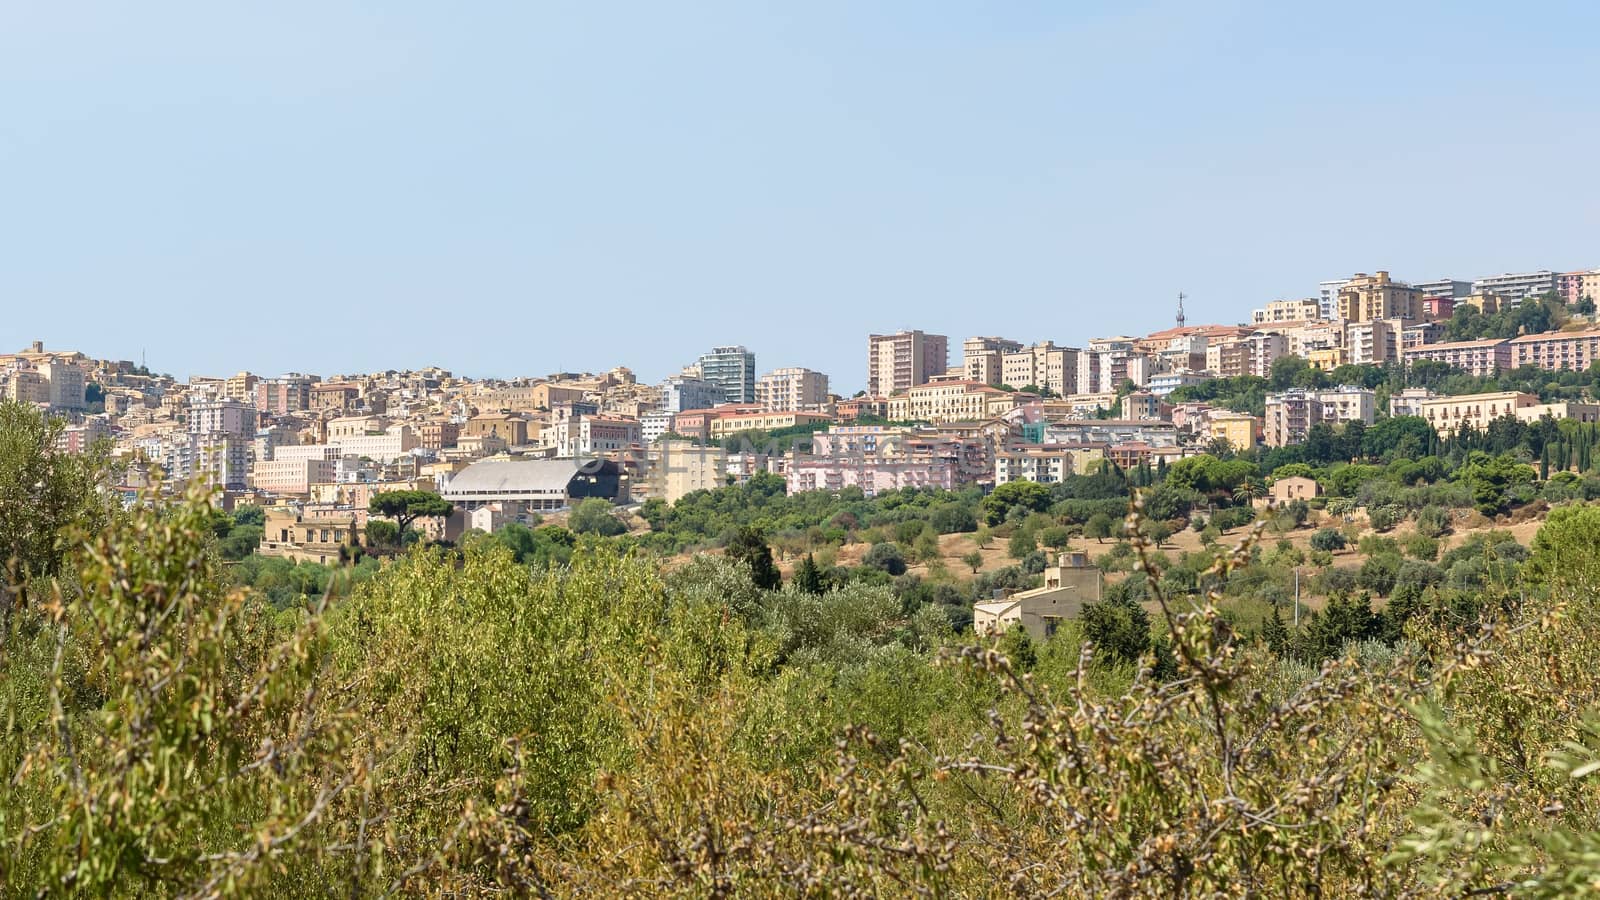 Panoramic view of Agrigento city on Sicily by mkos83